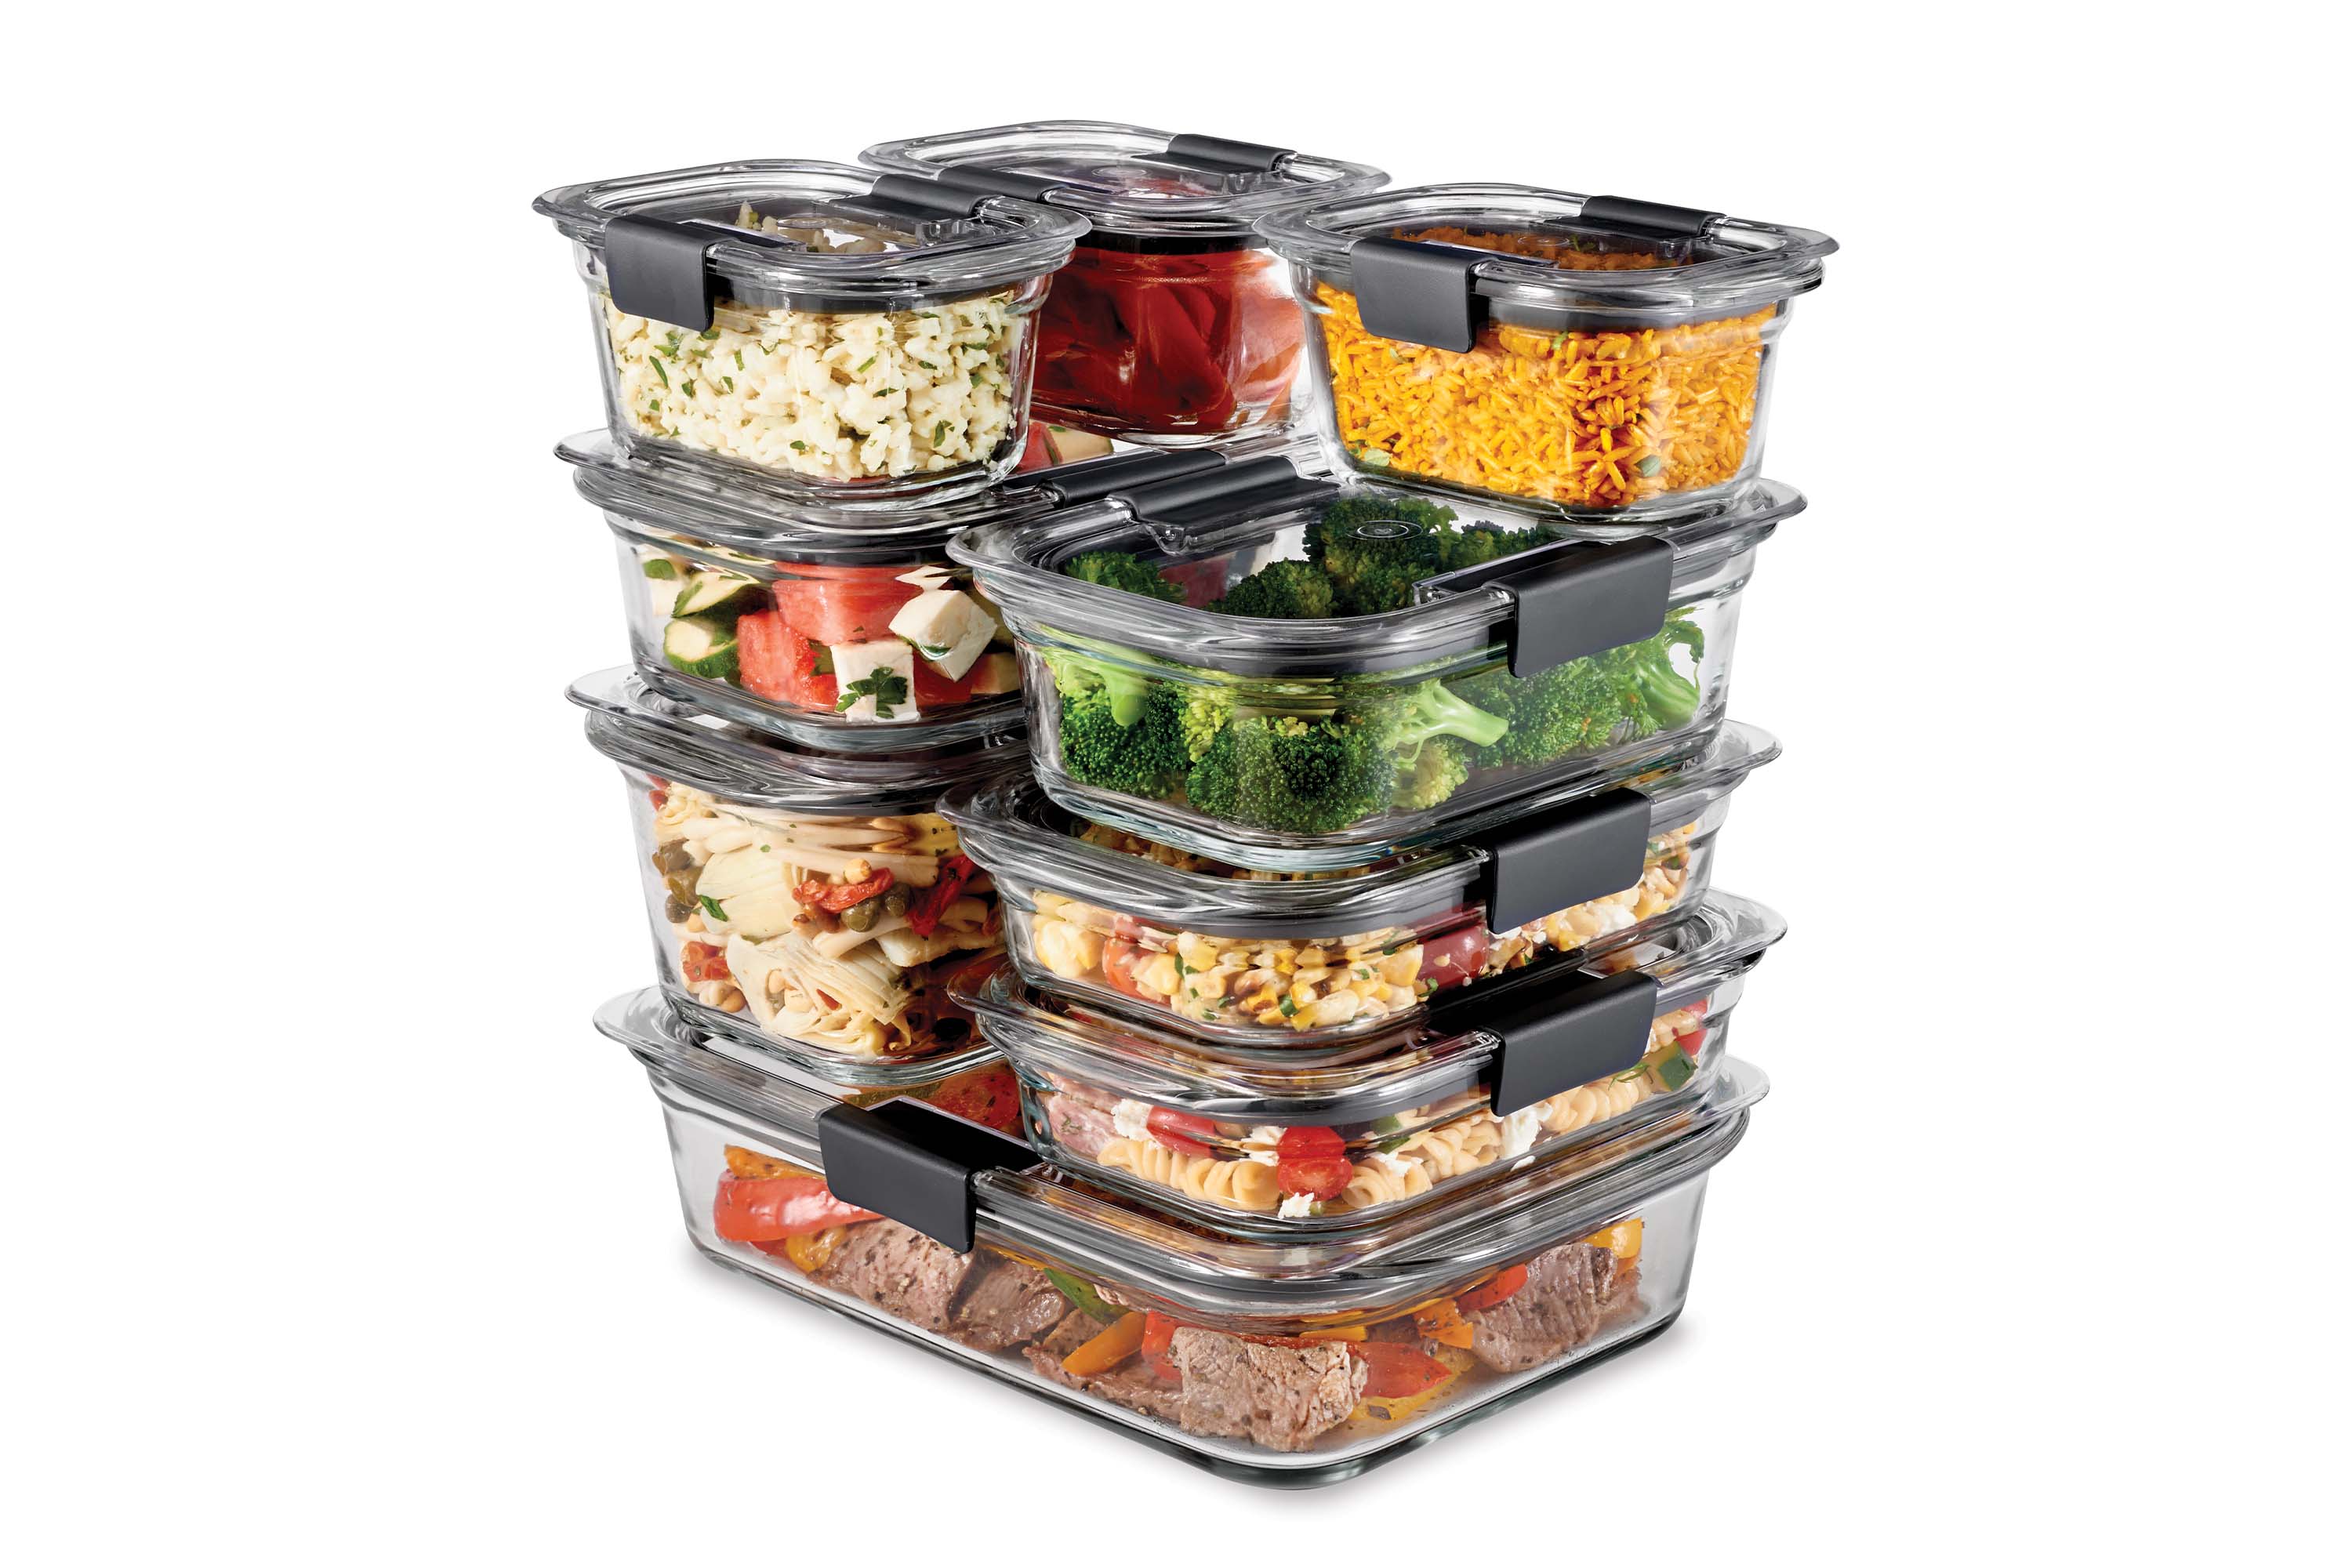 Best Food Storage Containers for Your Refrigerator